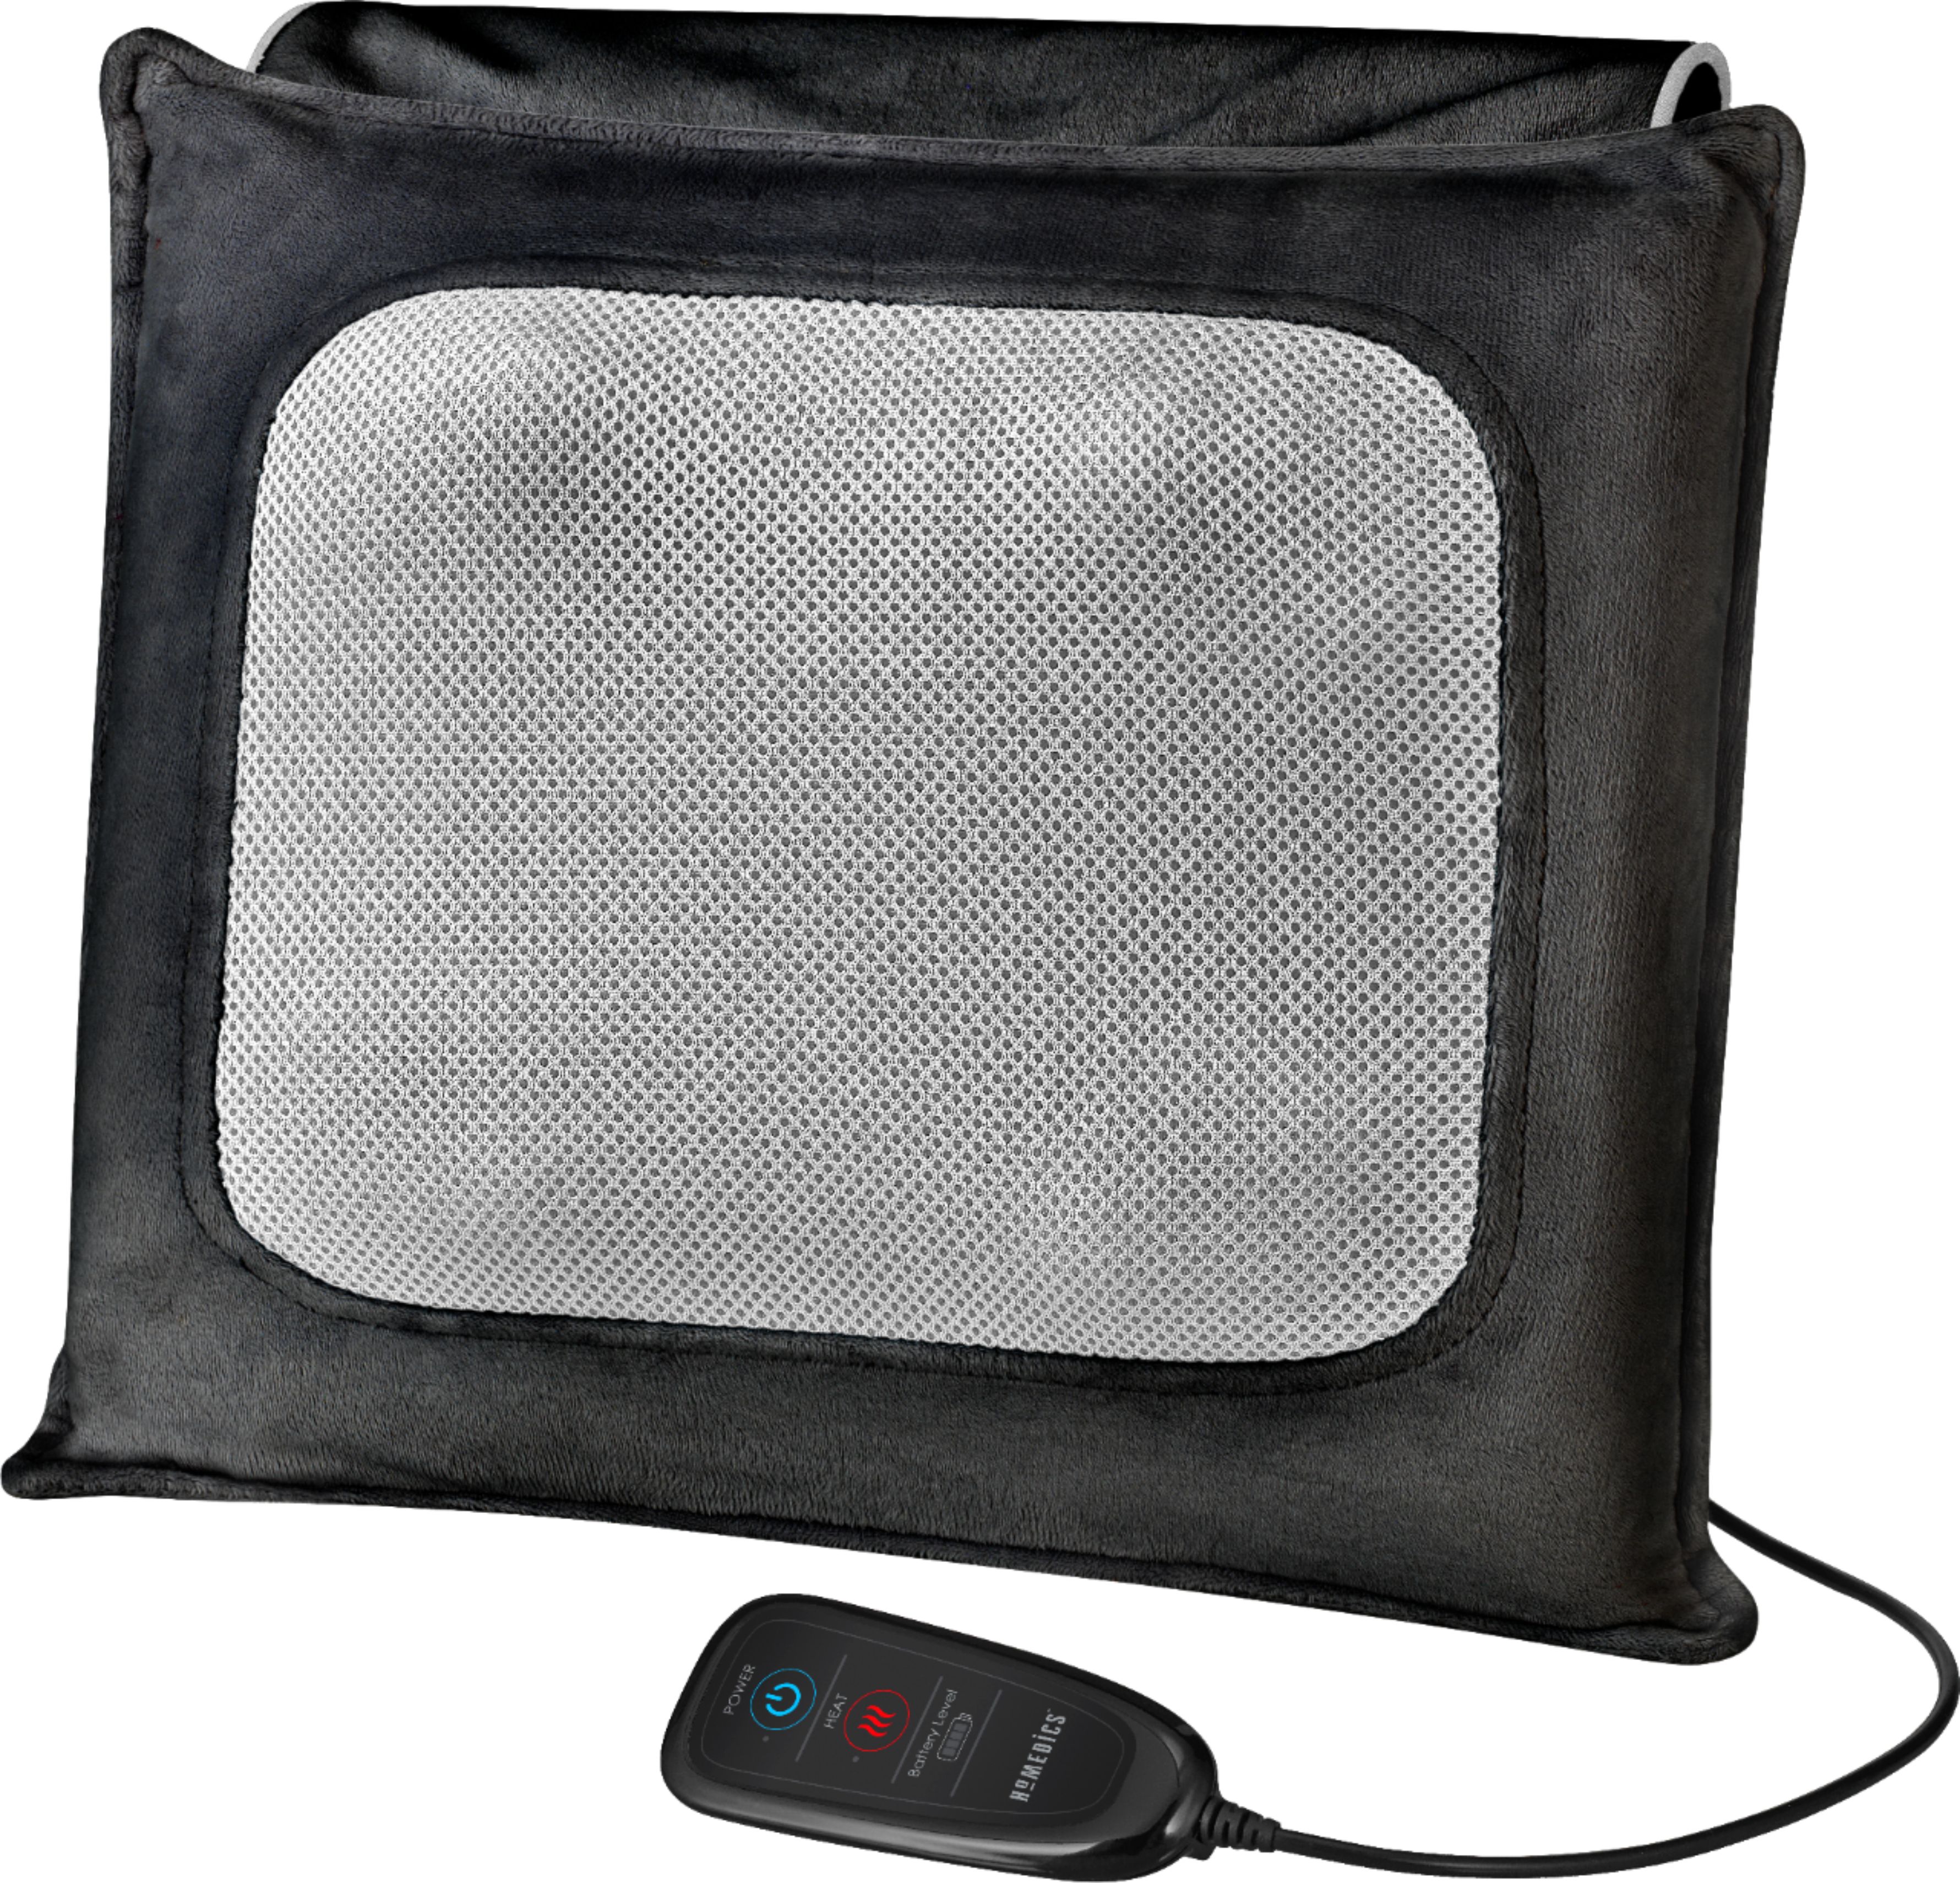 Shiatsu Massage Pillow with Heat and Car/Home Chargers - DailySteals